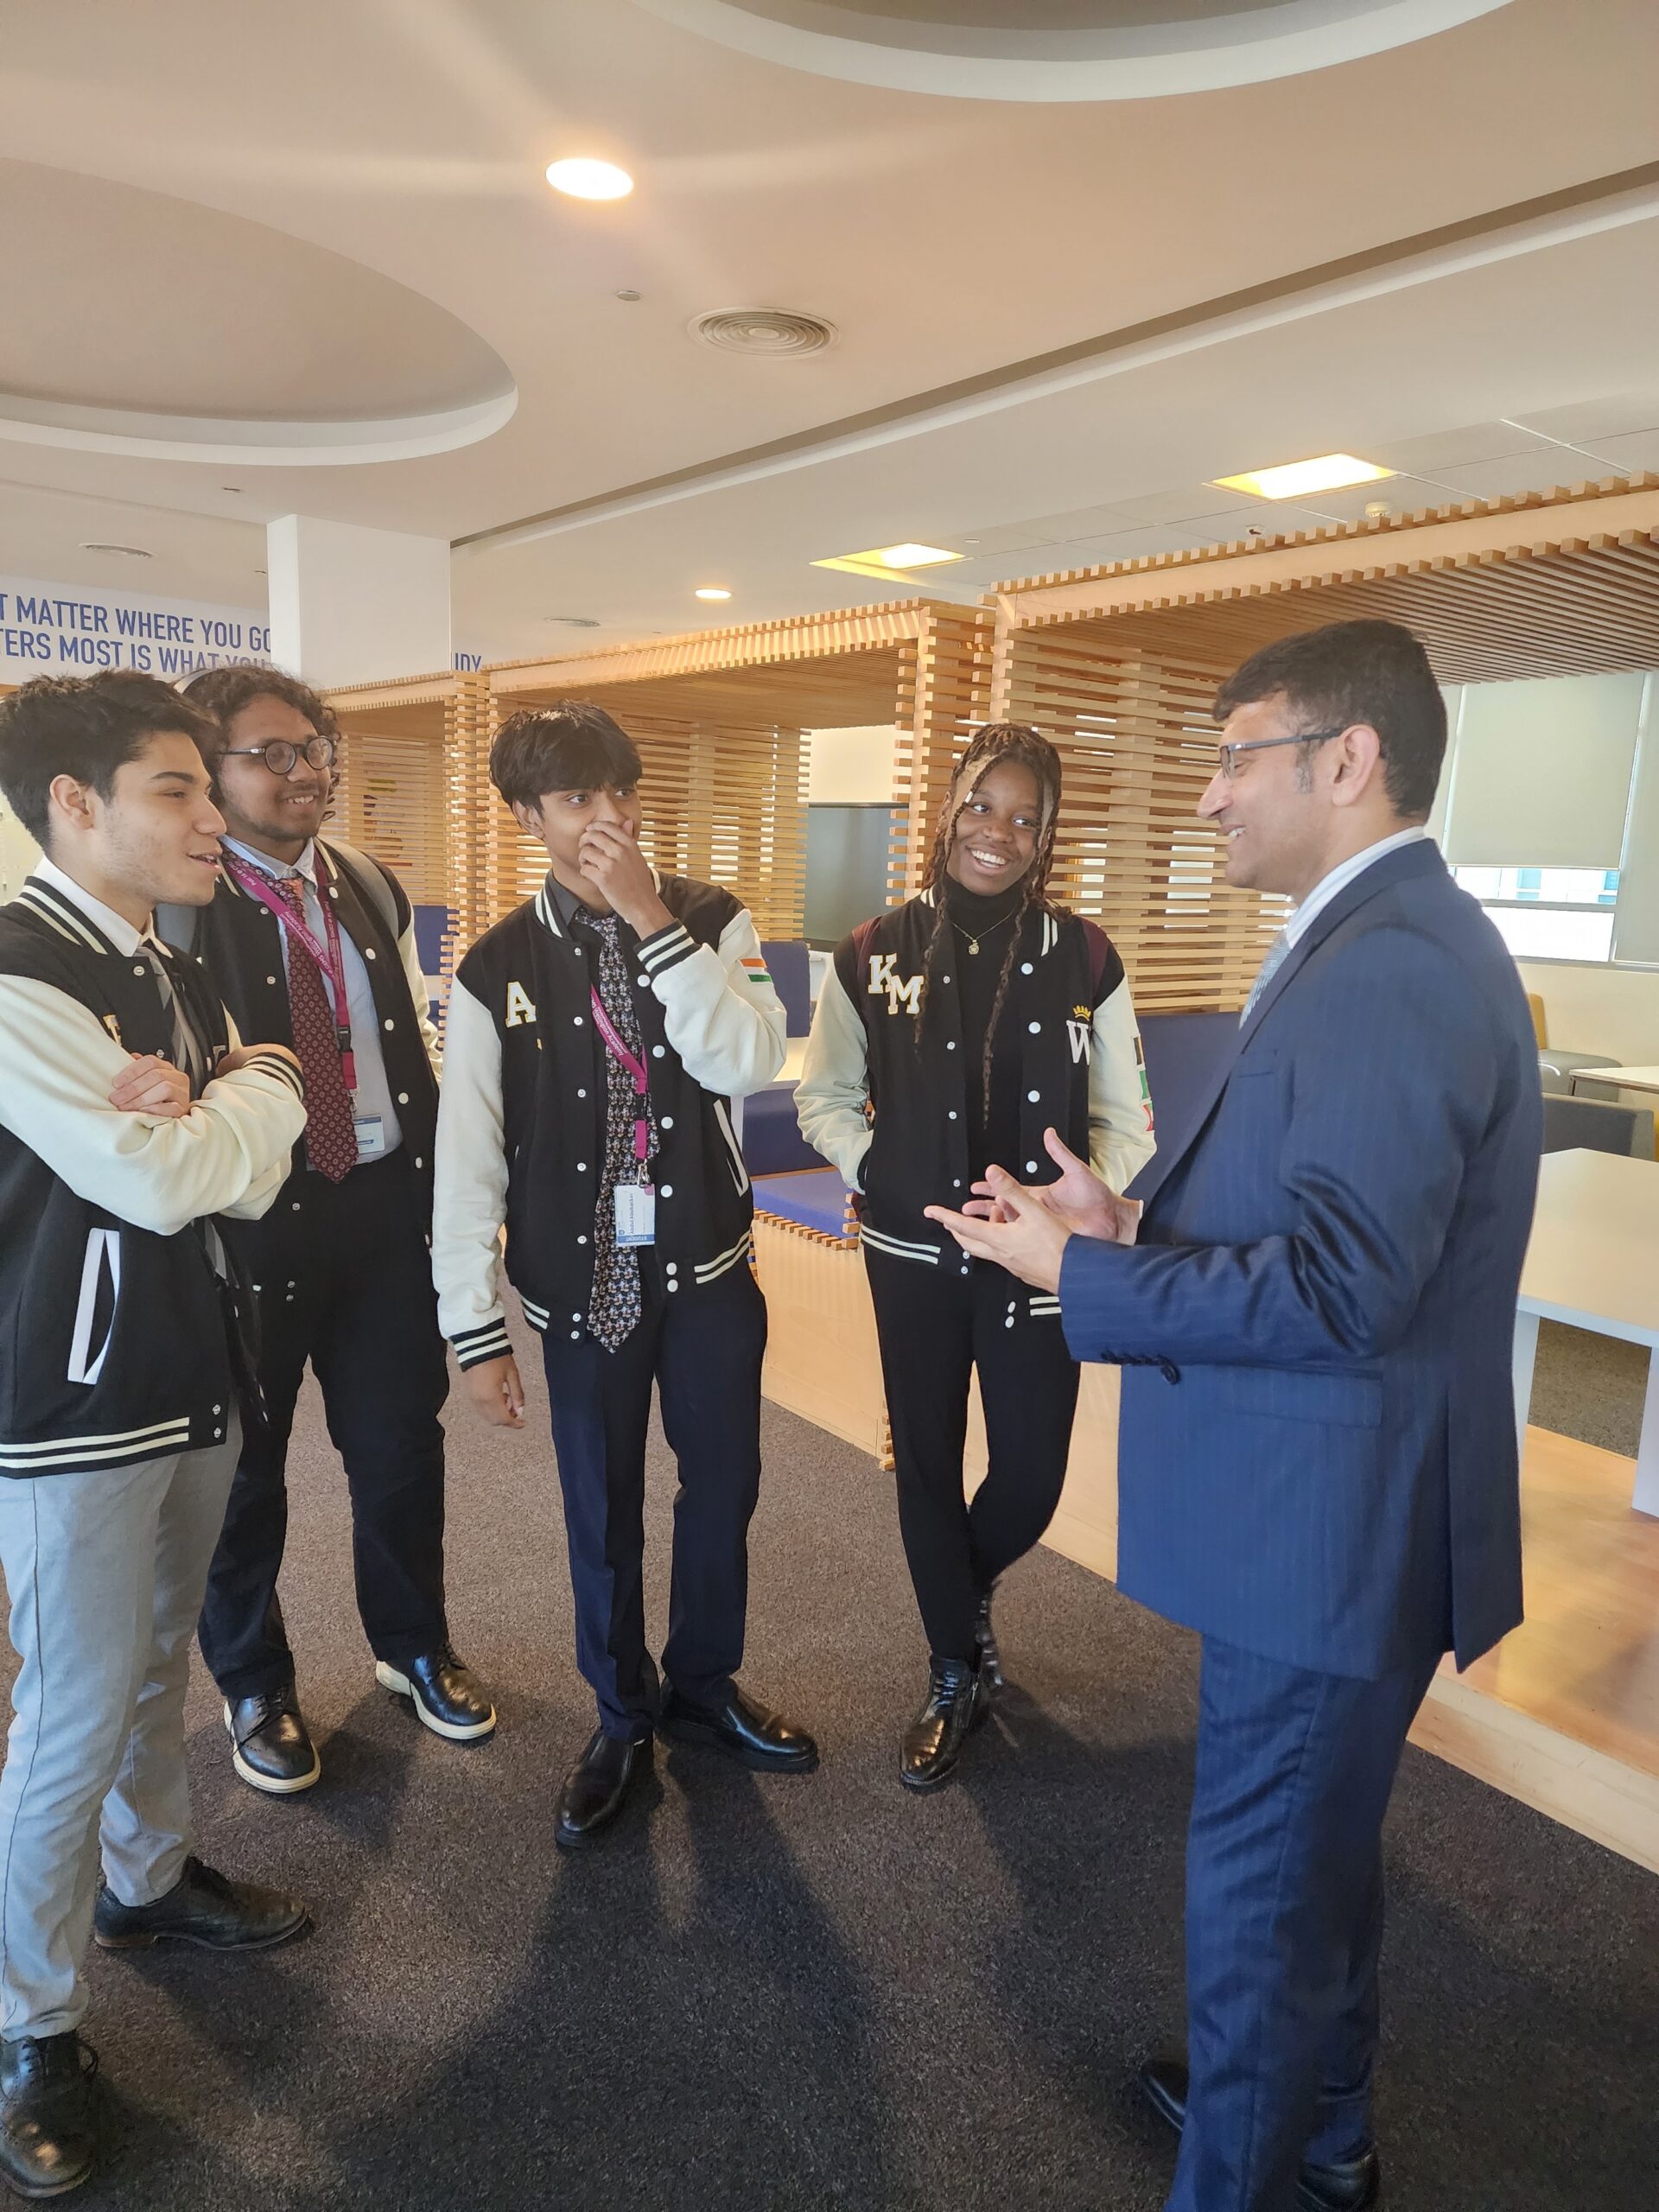 Pictured: Joel Nainie, IB Director of Programmes, GEMS Wellington Academy – Silicon Oasis, discussing the power of the IB with GEMS Education students